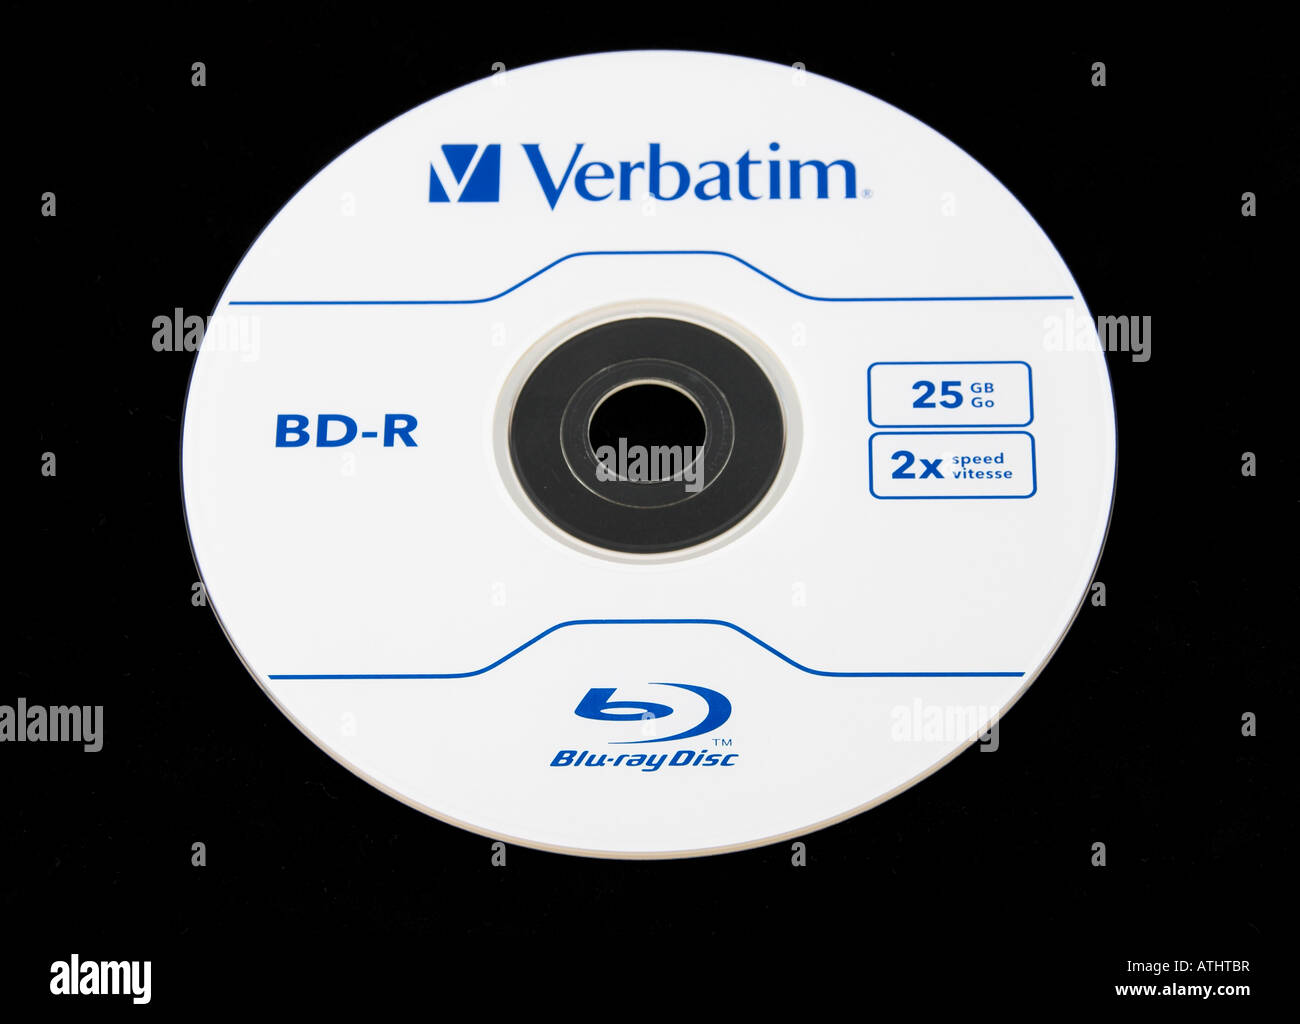 Verbatim Logo High Resolution Stock Photography and Images - Alamy